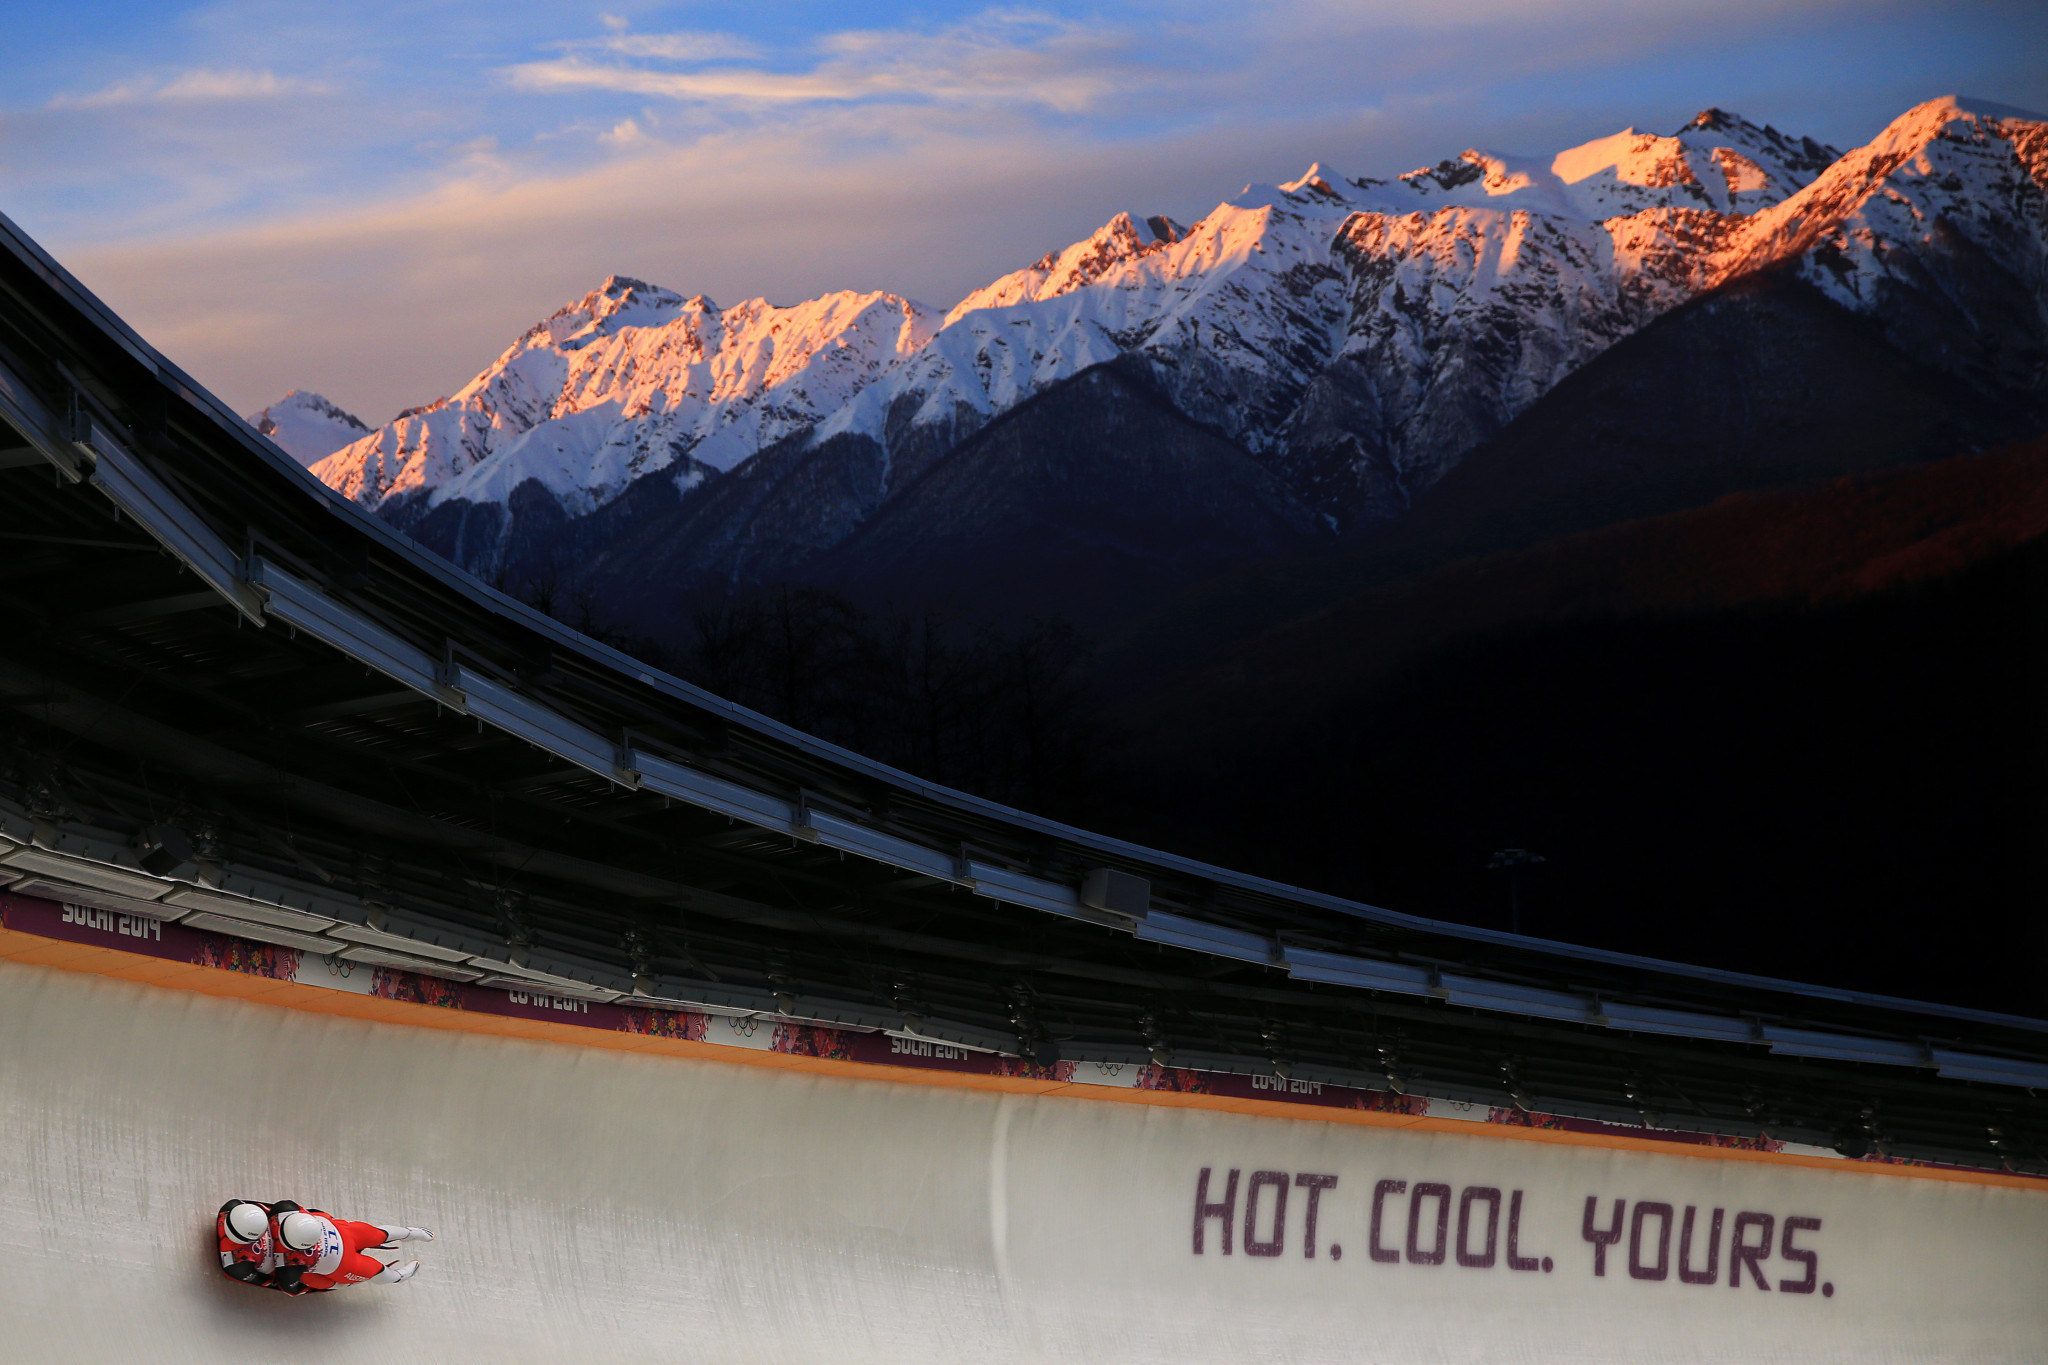 The Russian luge team is scheduled to relocate to Sochi later this month ©Getty Images